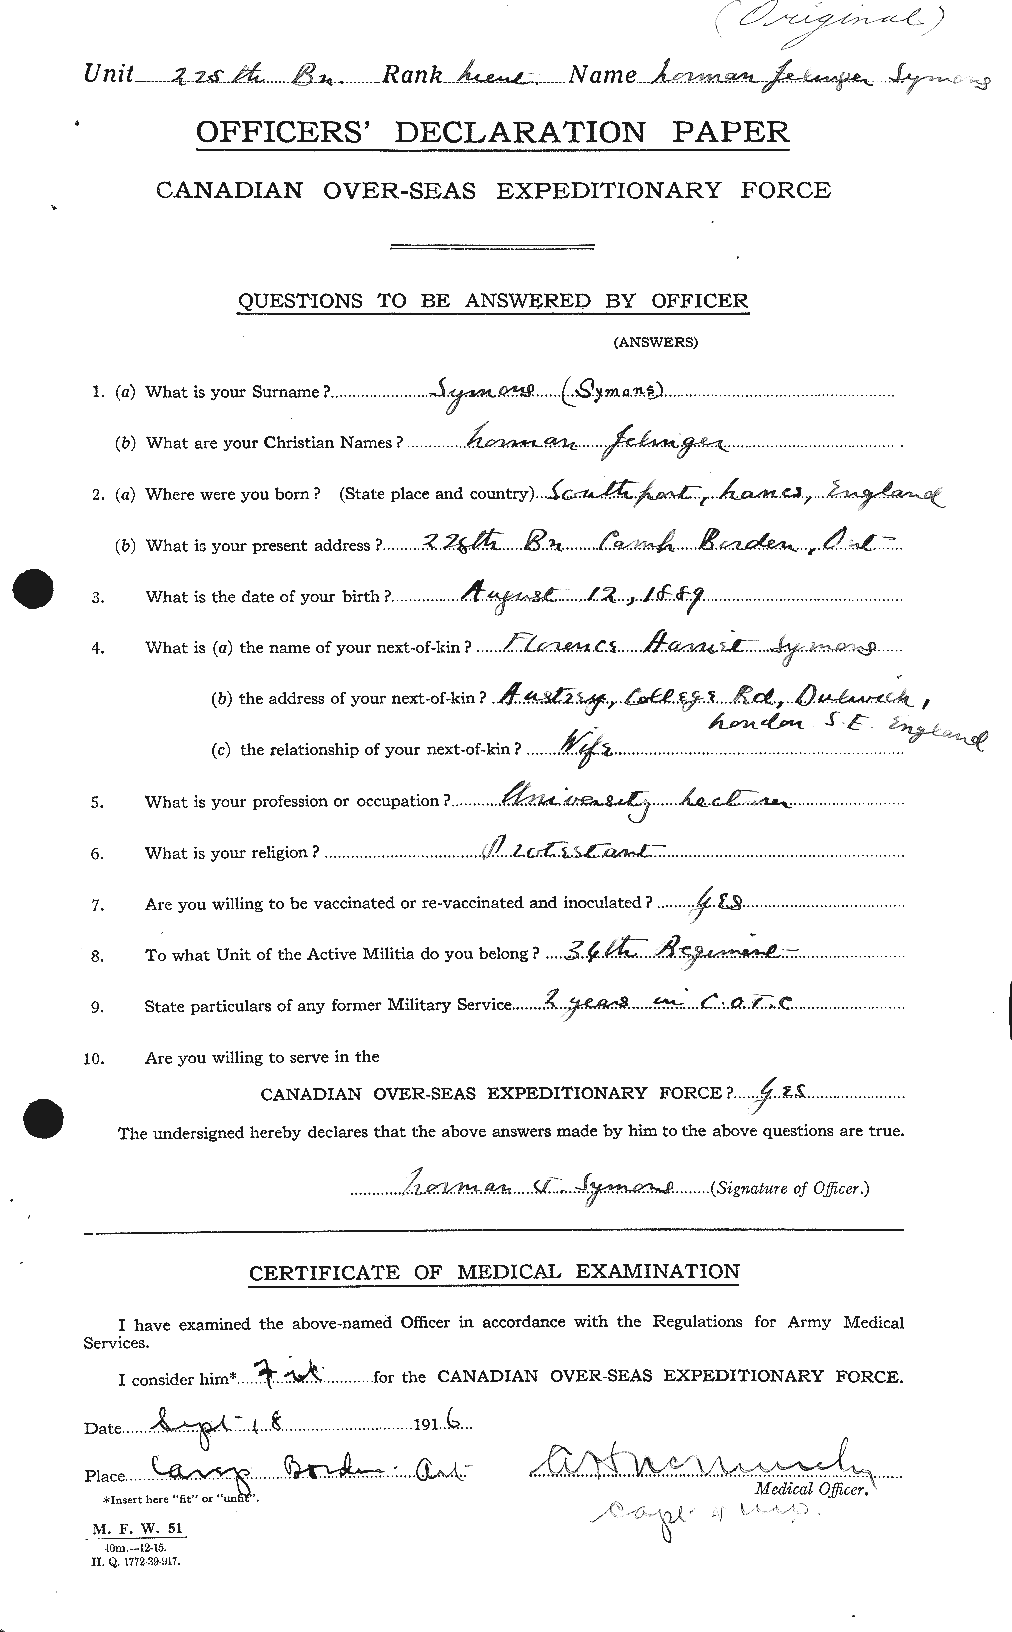 Personnel Records of the First World War - CEF 624874a